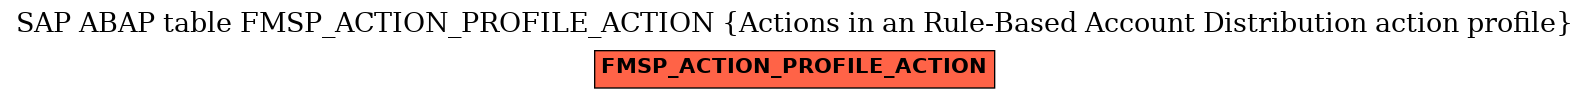 E-R Diagram for table FMSP_ACTION_PROFILE_ACTION (Actions in an Rule-Based Account Distribution action profile)